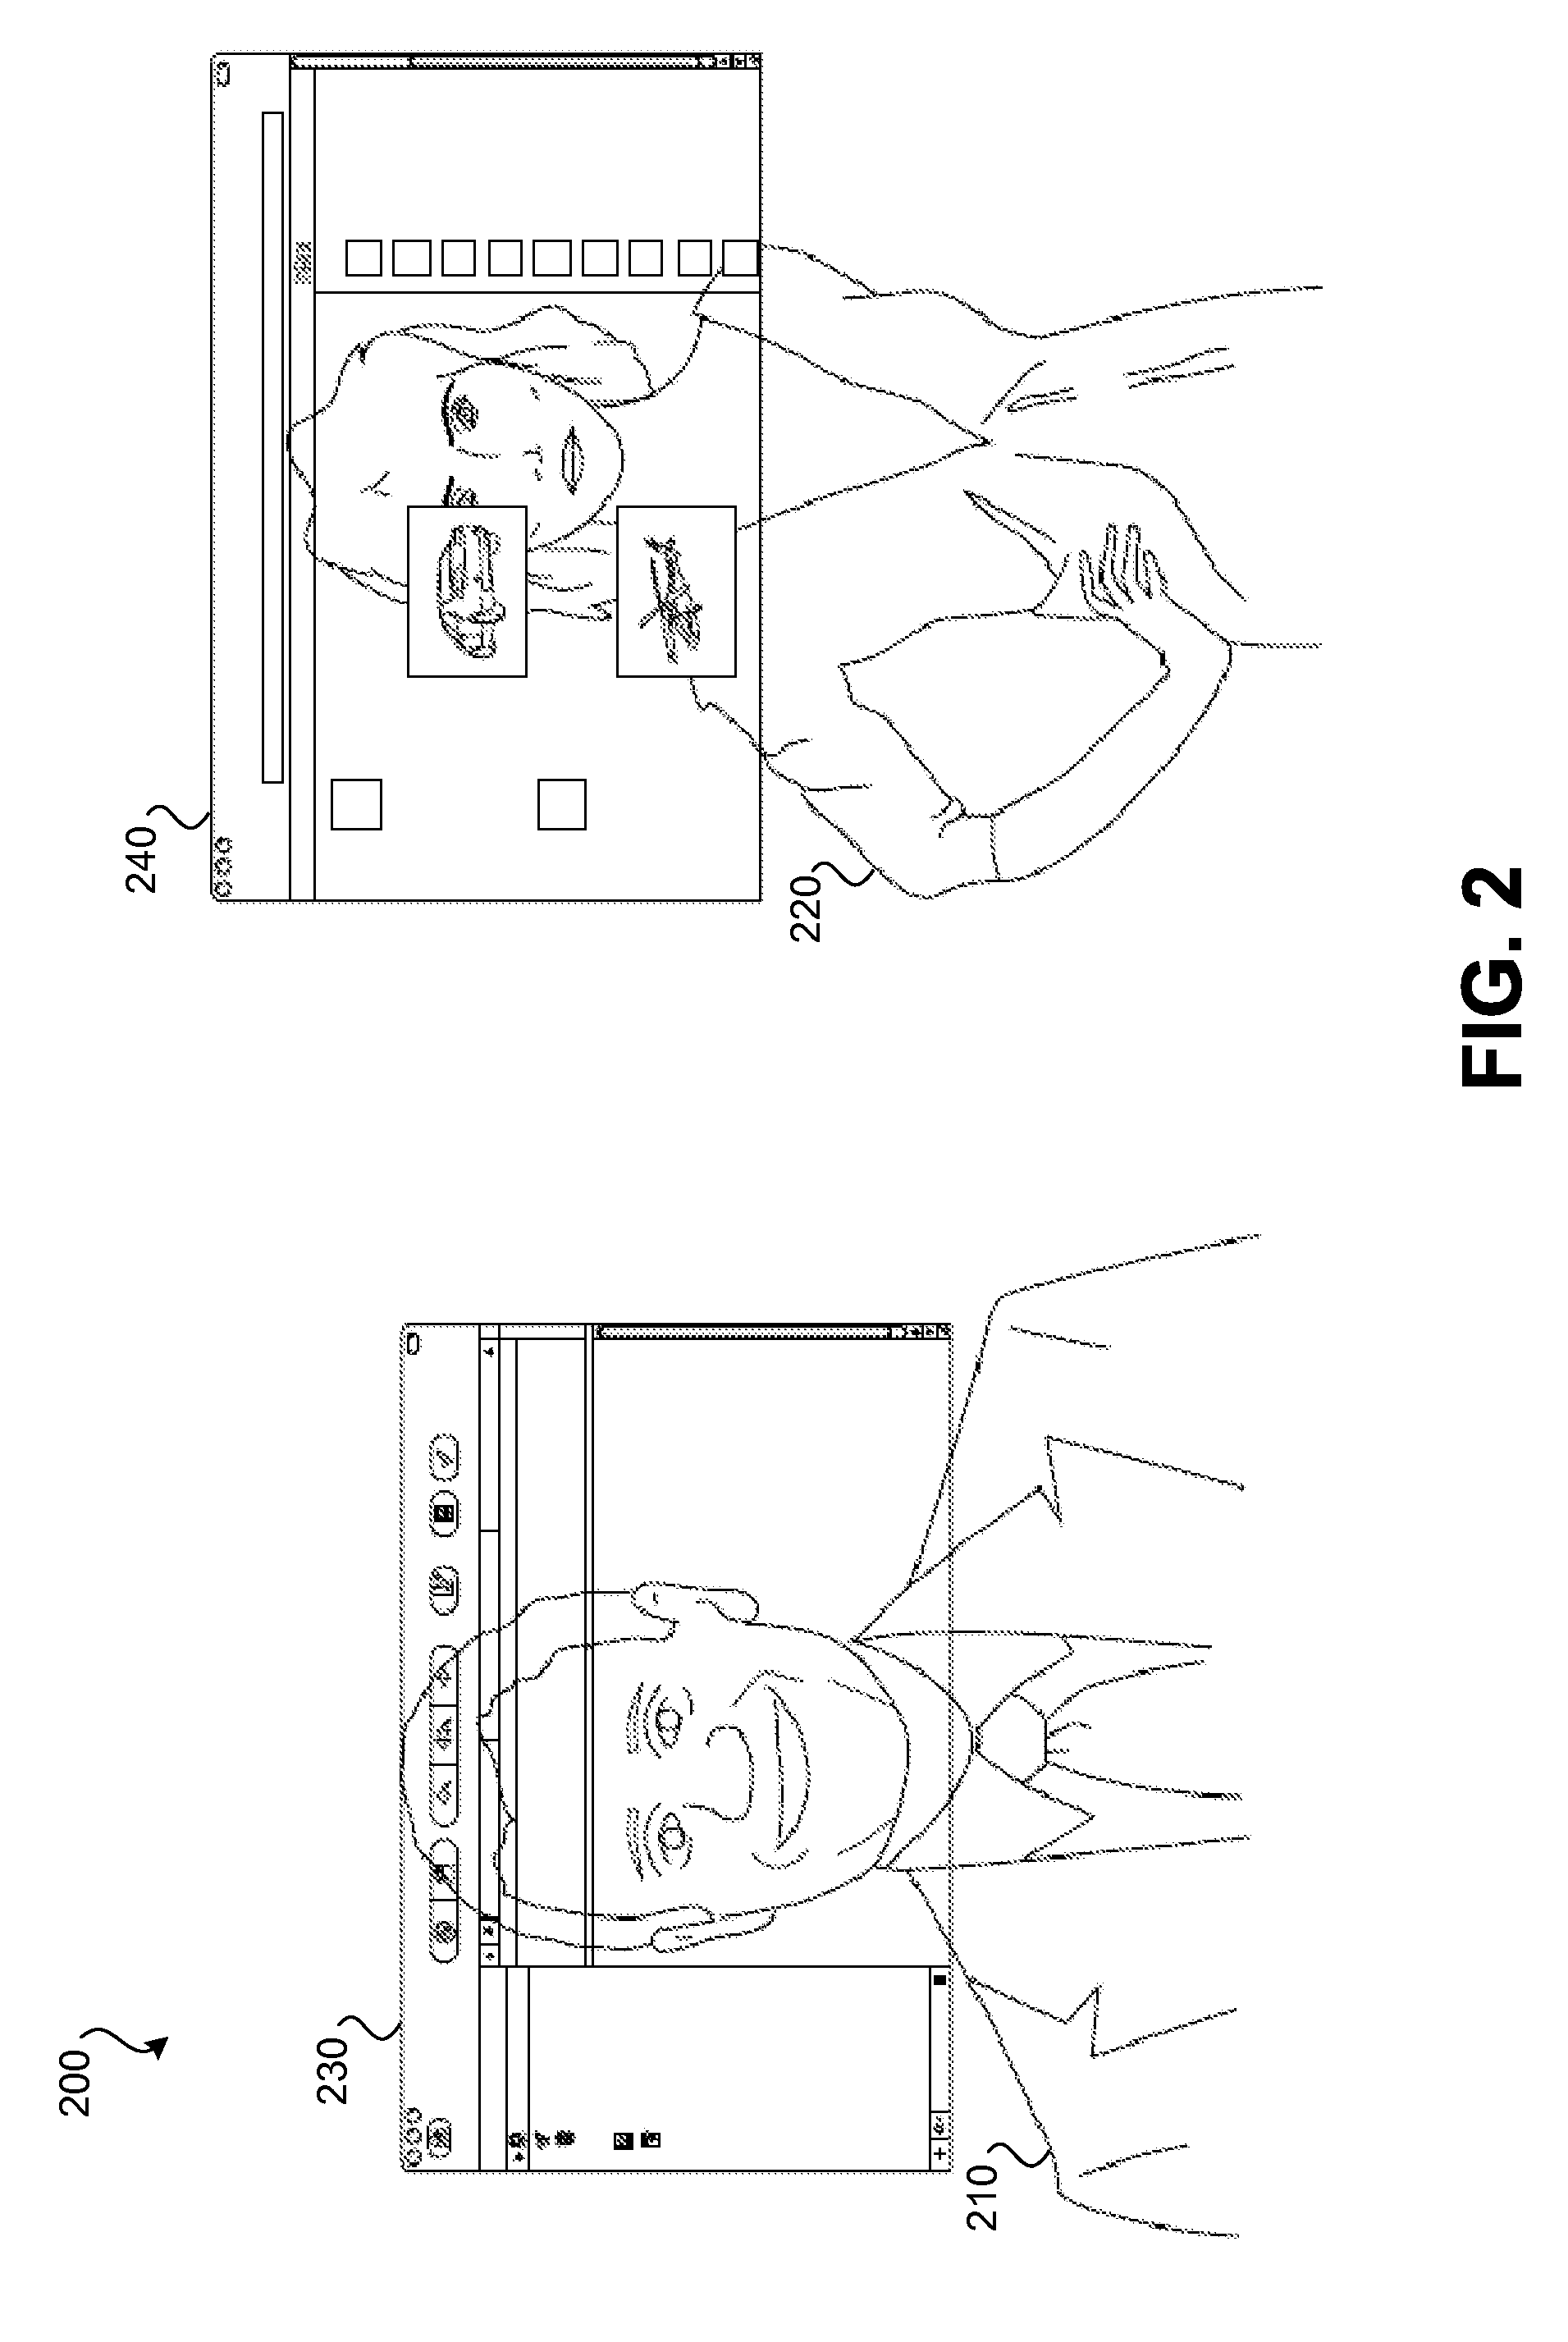 Methods and systems for making the use of head-mounted displays less obvious to non-users